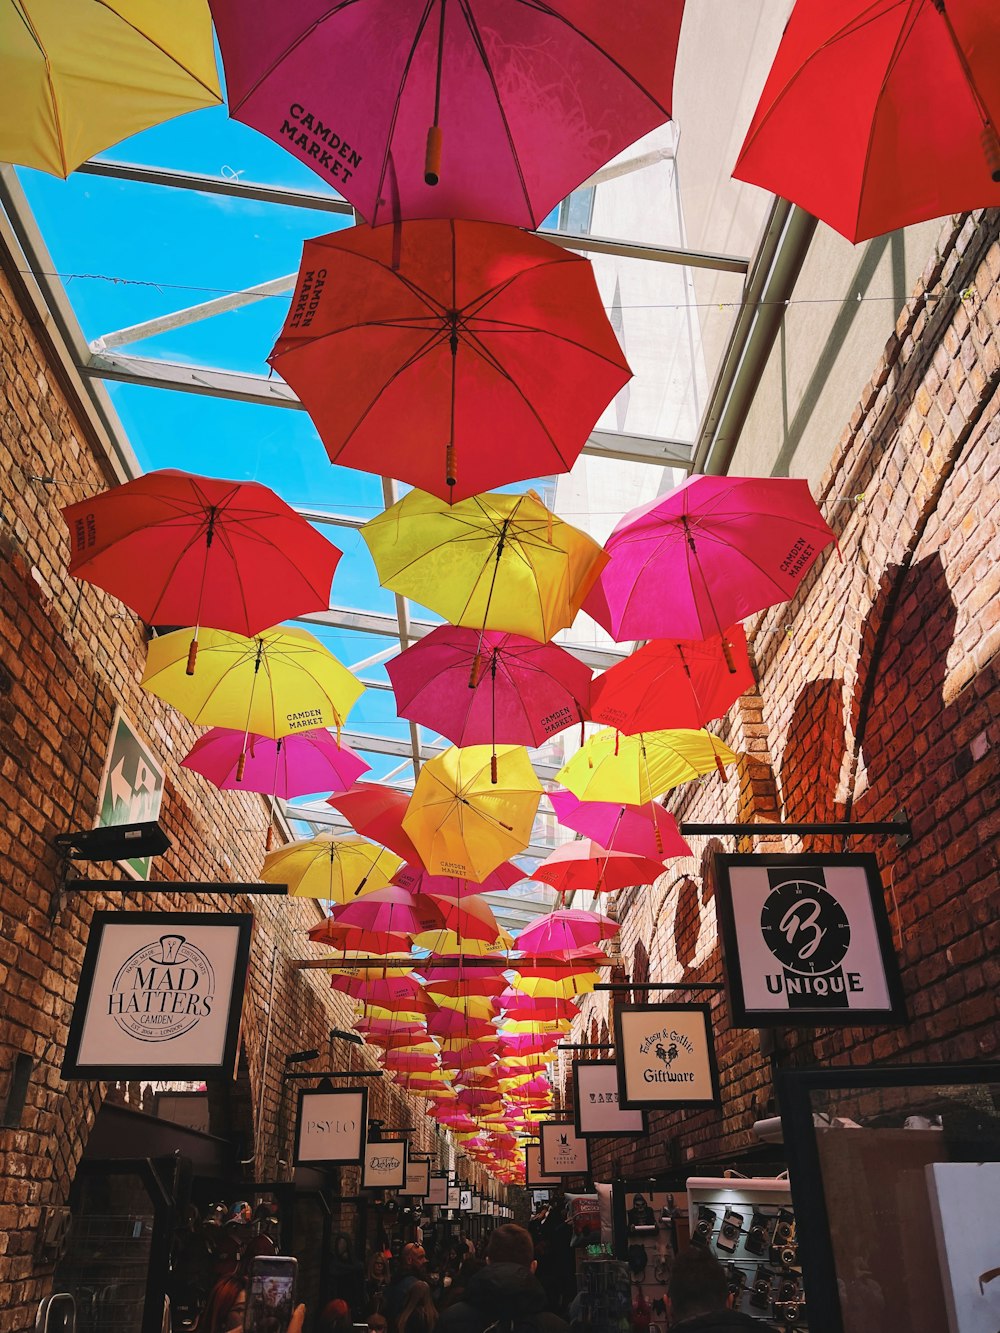 a group of umbrellas hanging from the ceiling of a building